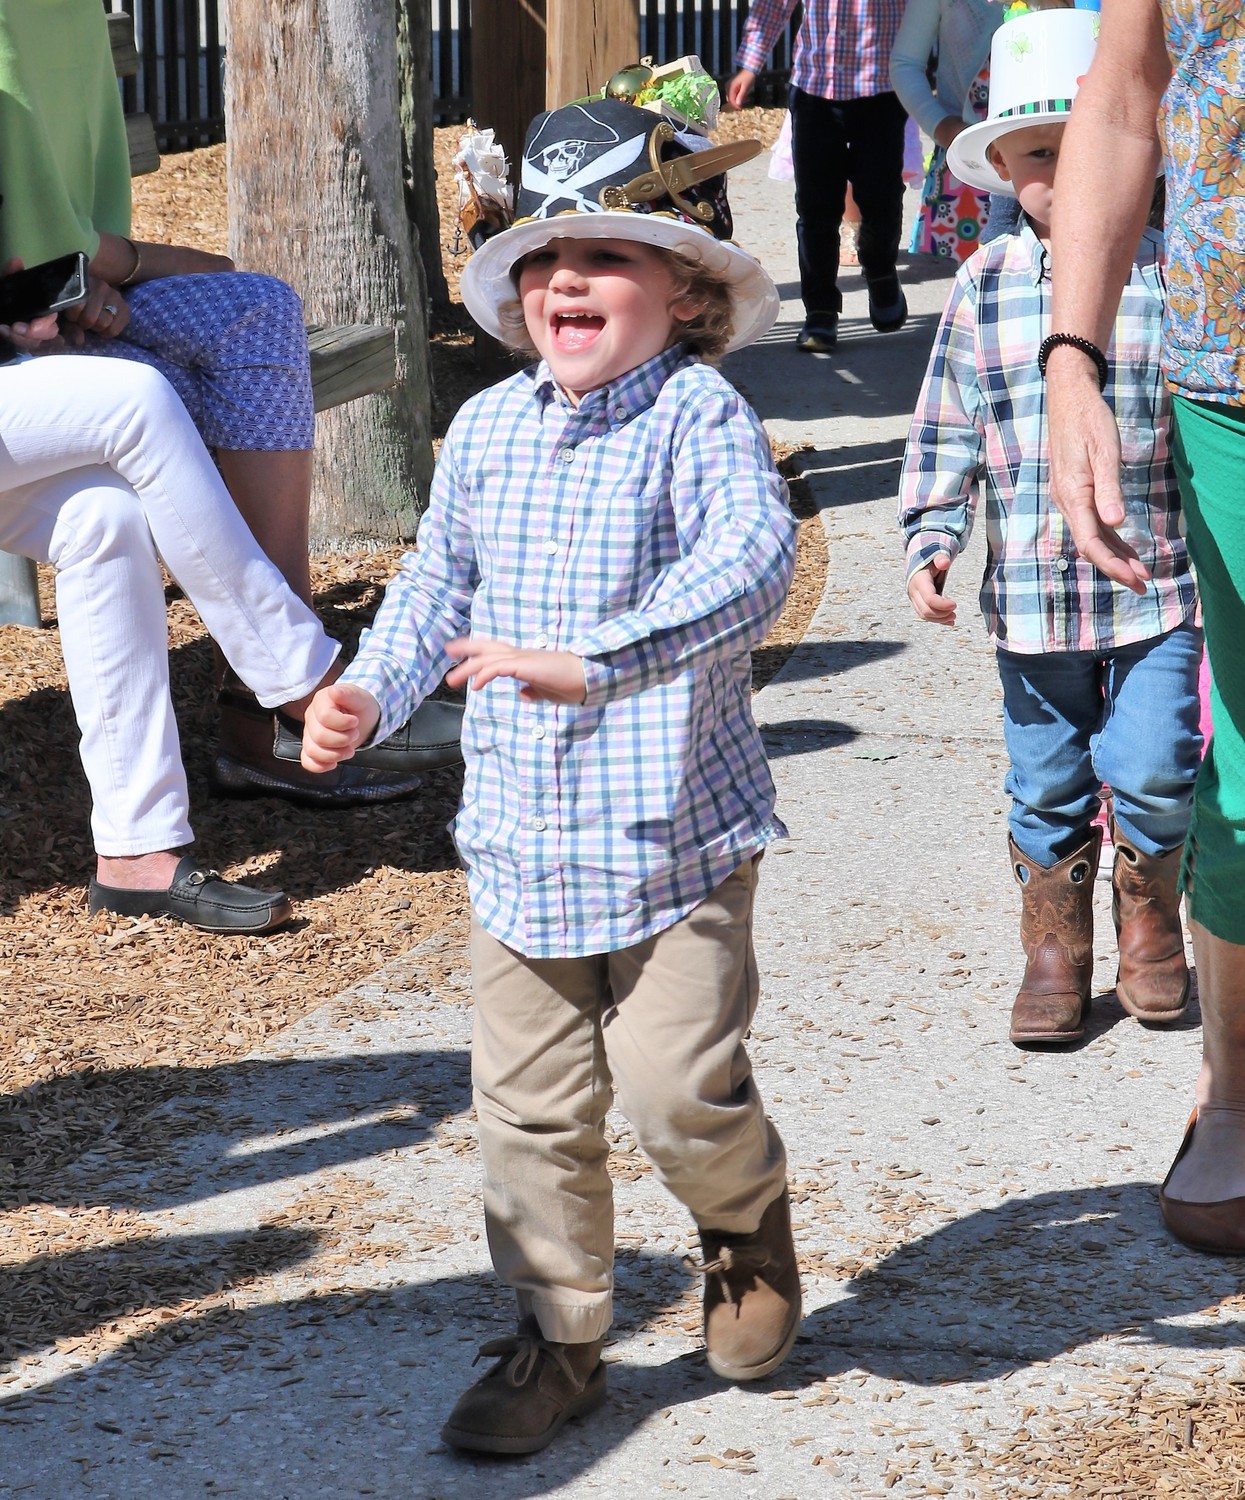 A boy laughs as he marches in his pirate-themed top hat.